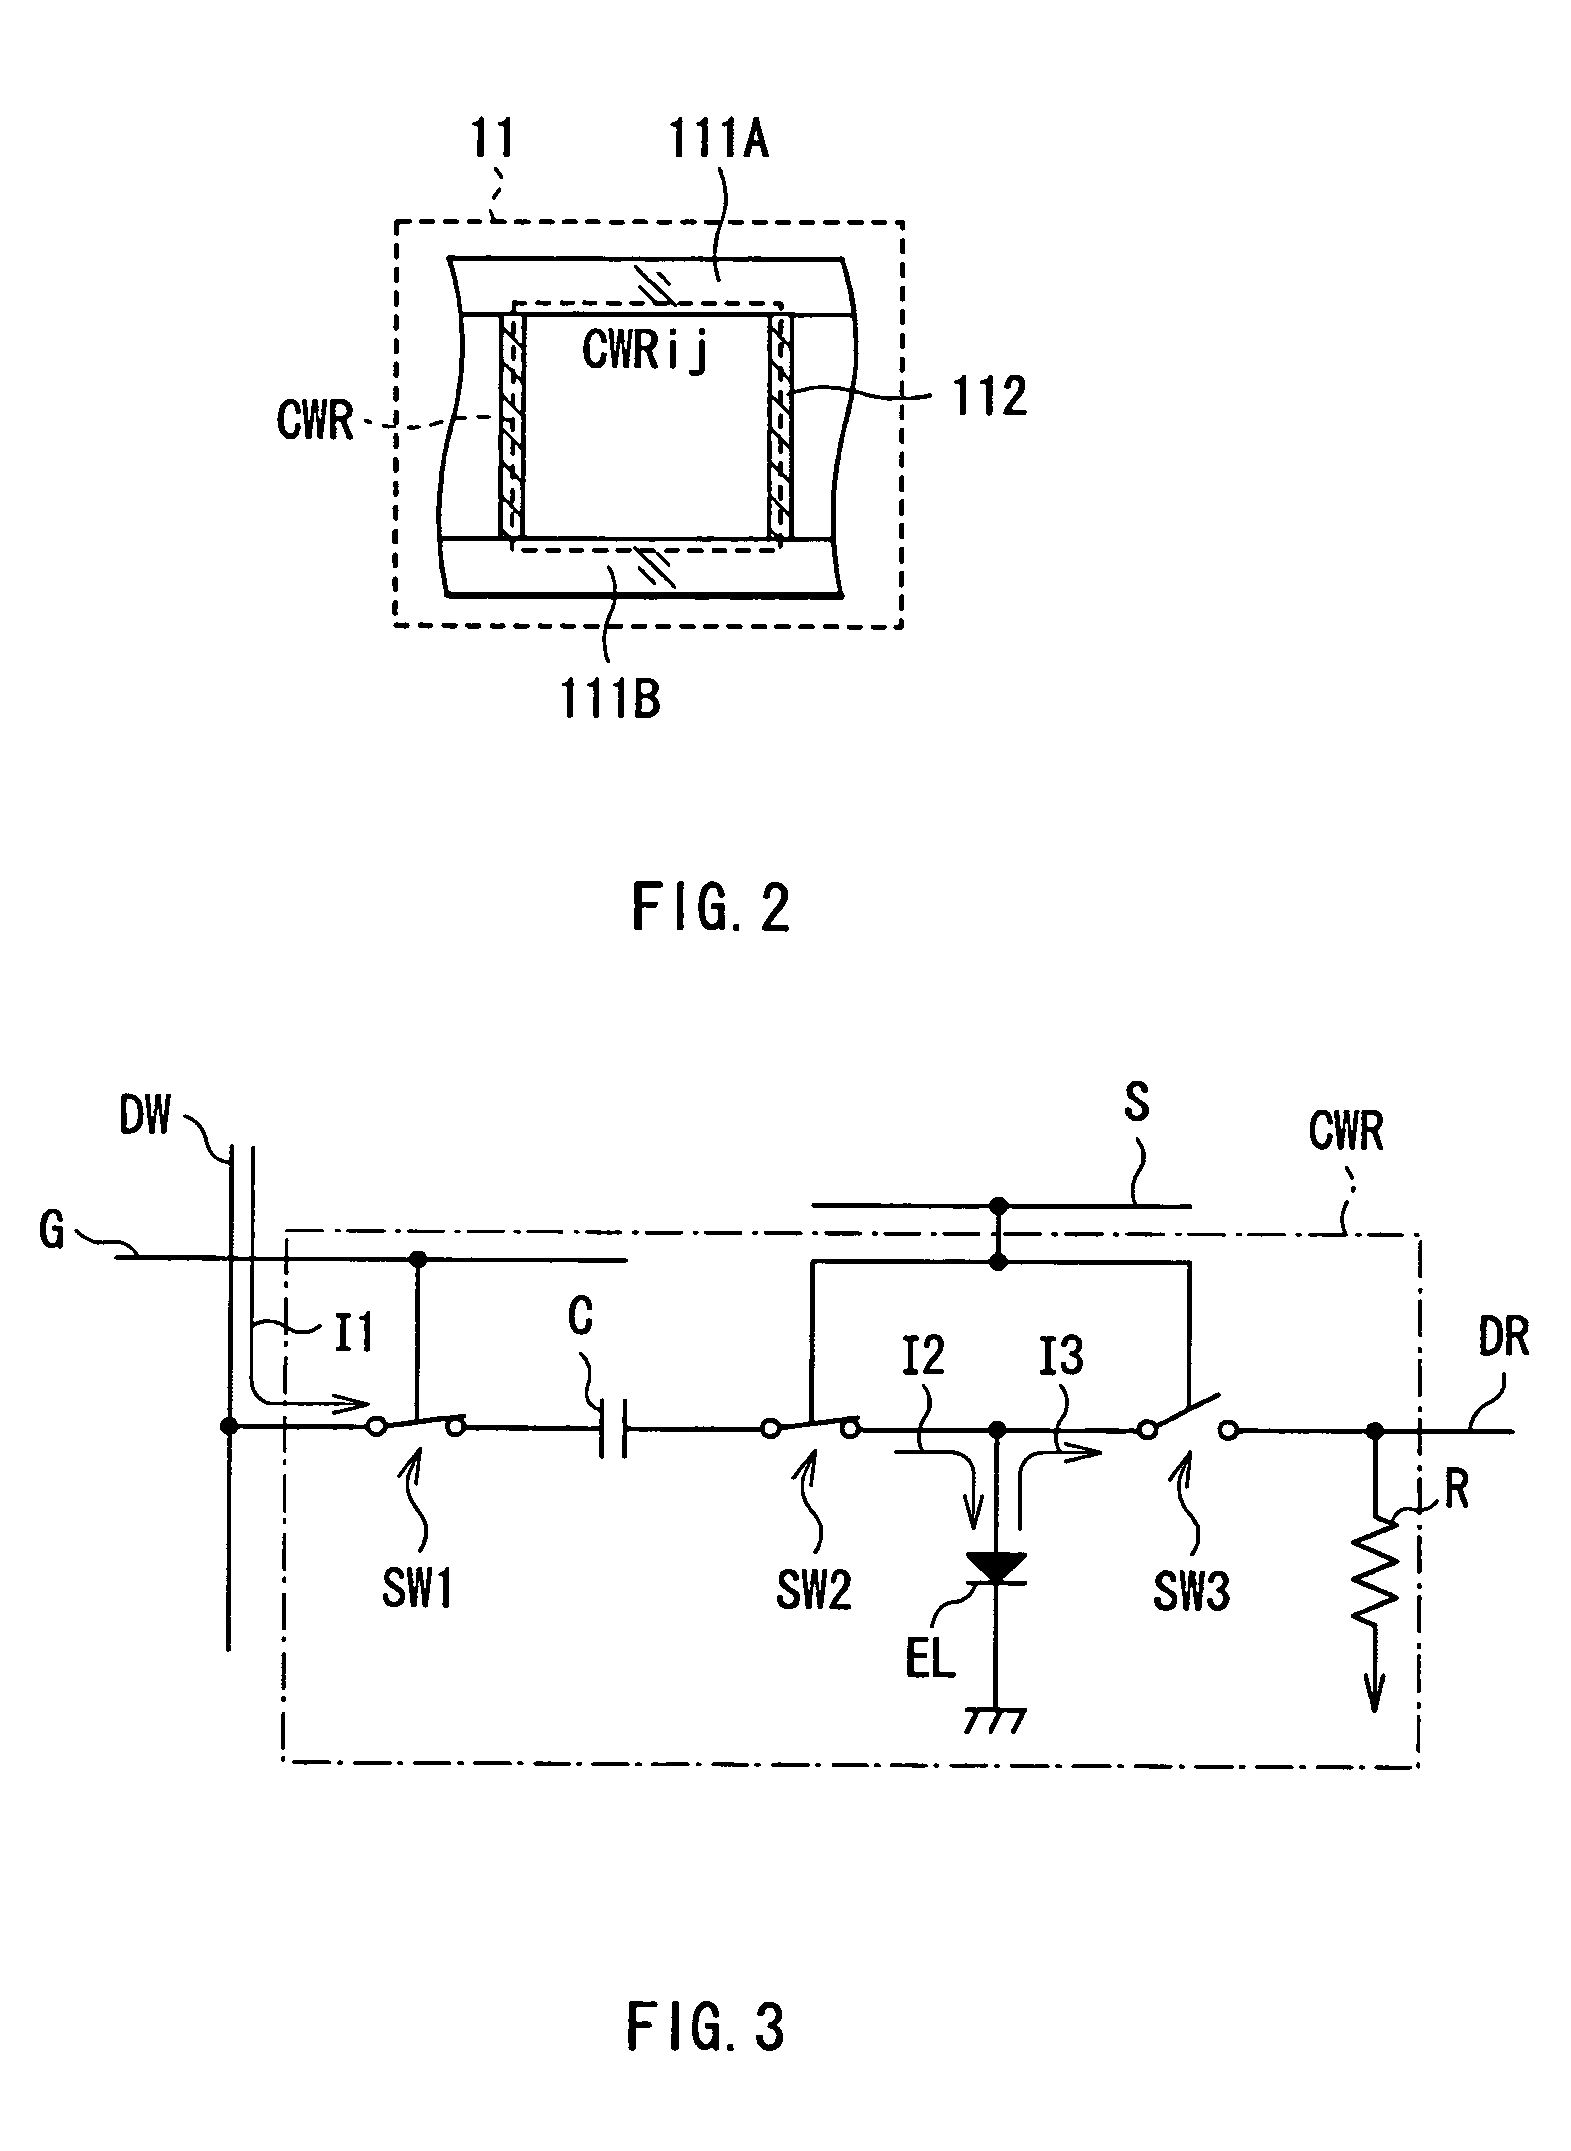 Display apparatus, communication system, and communication method